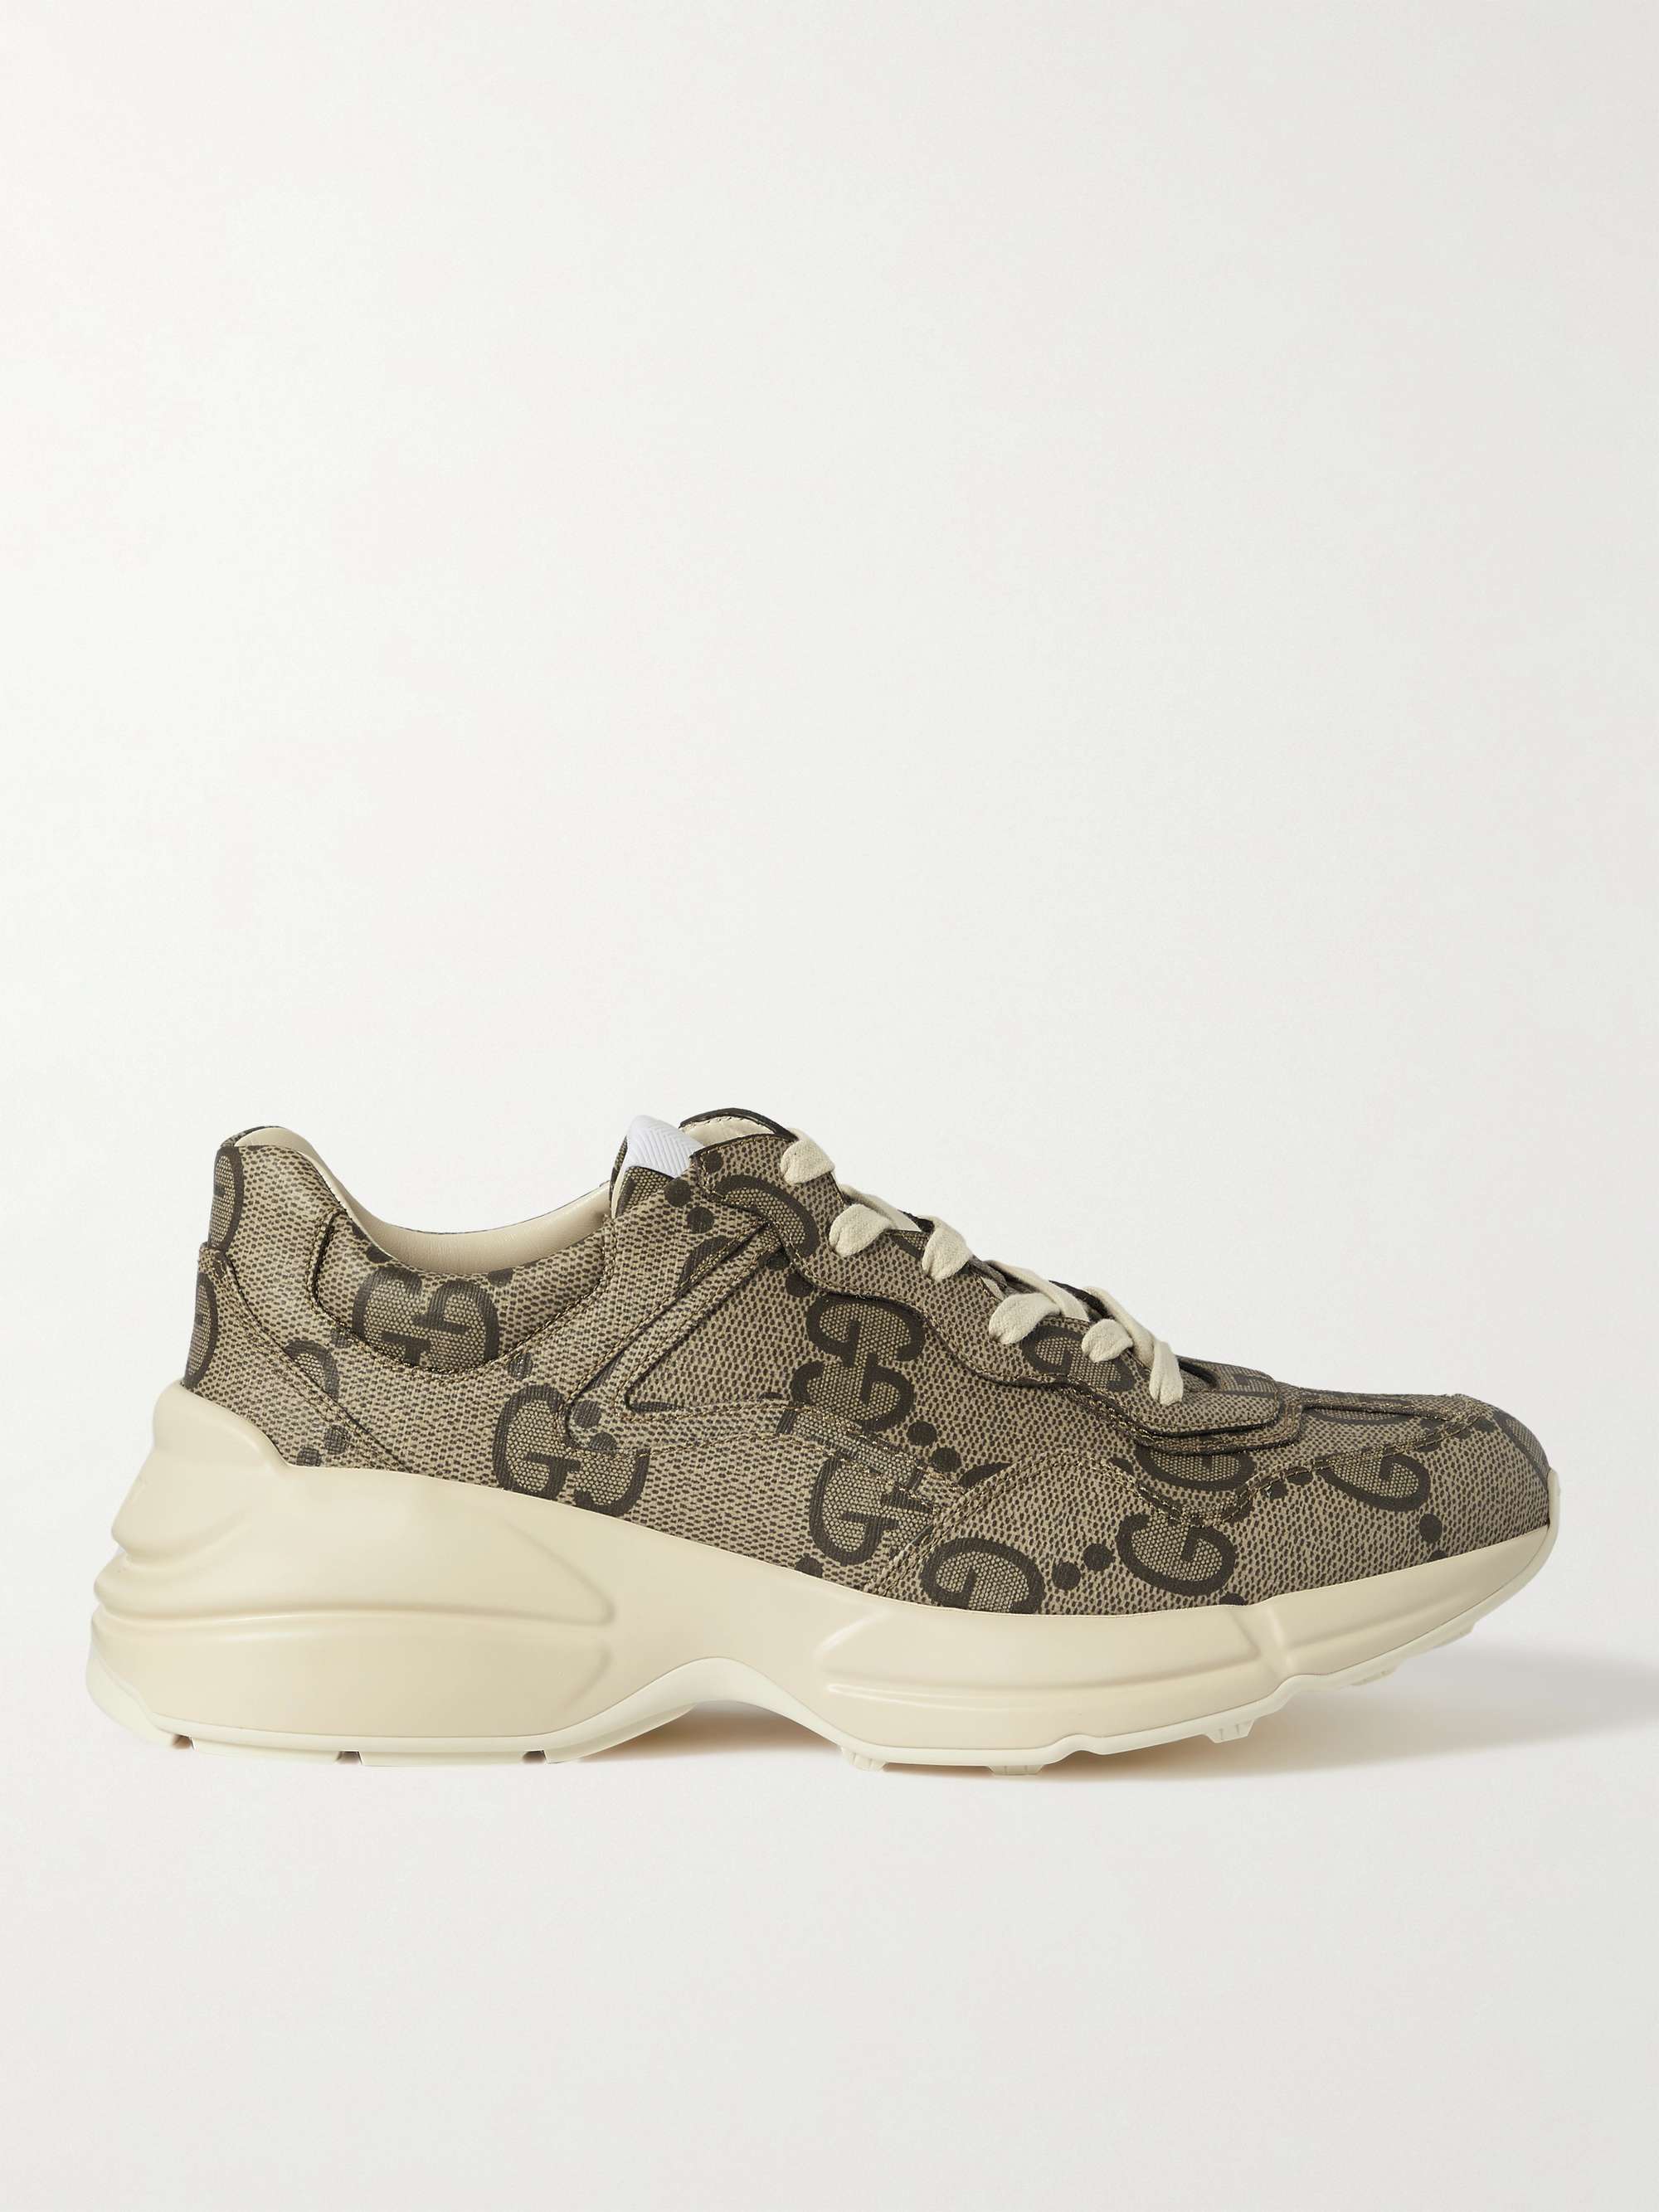 GUCCI Rhyton Monogrammed Canvas Sneakers